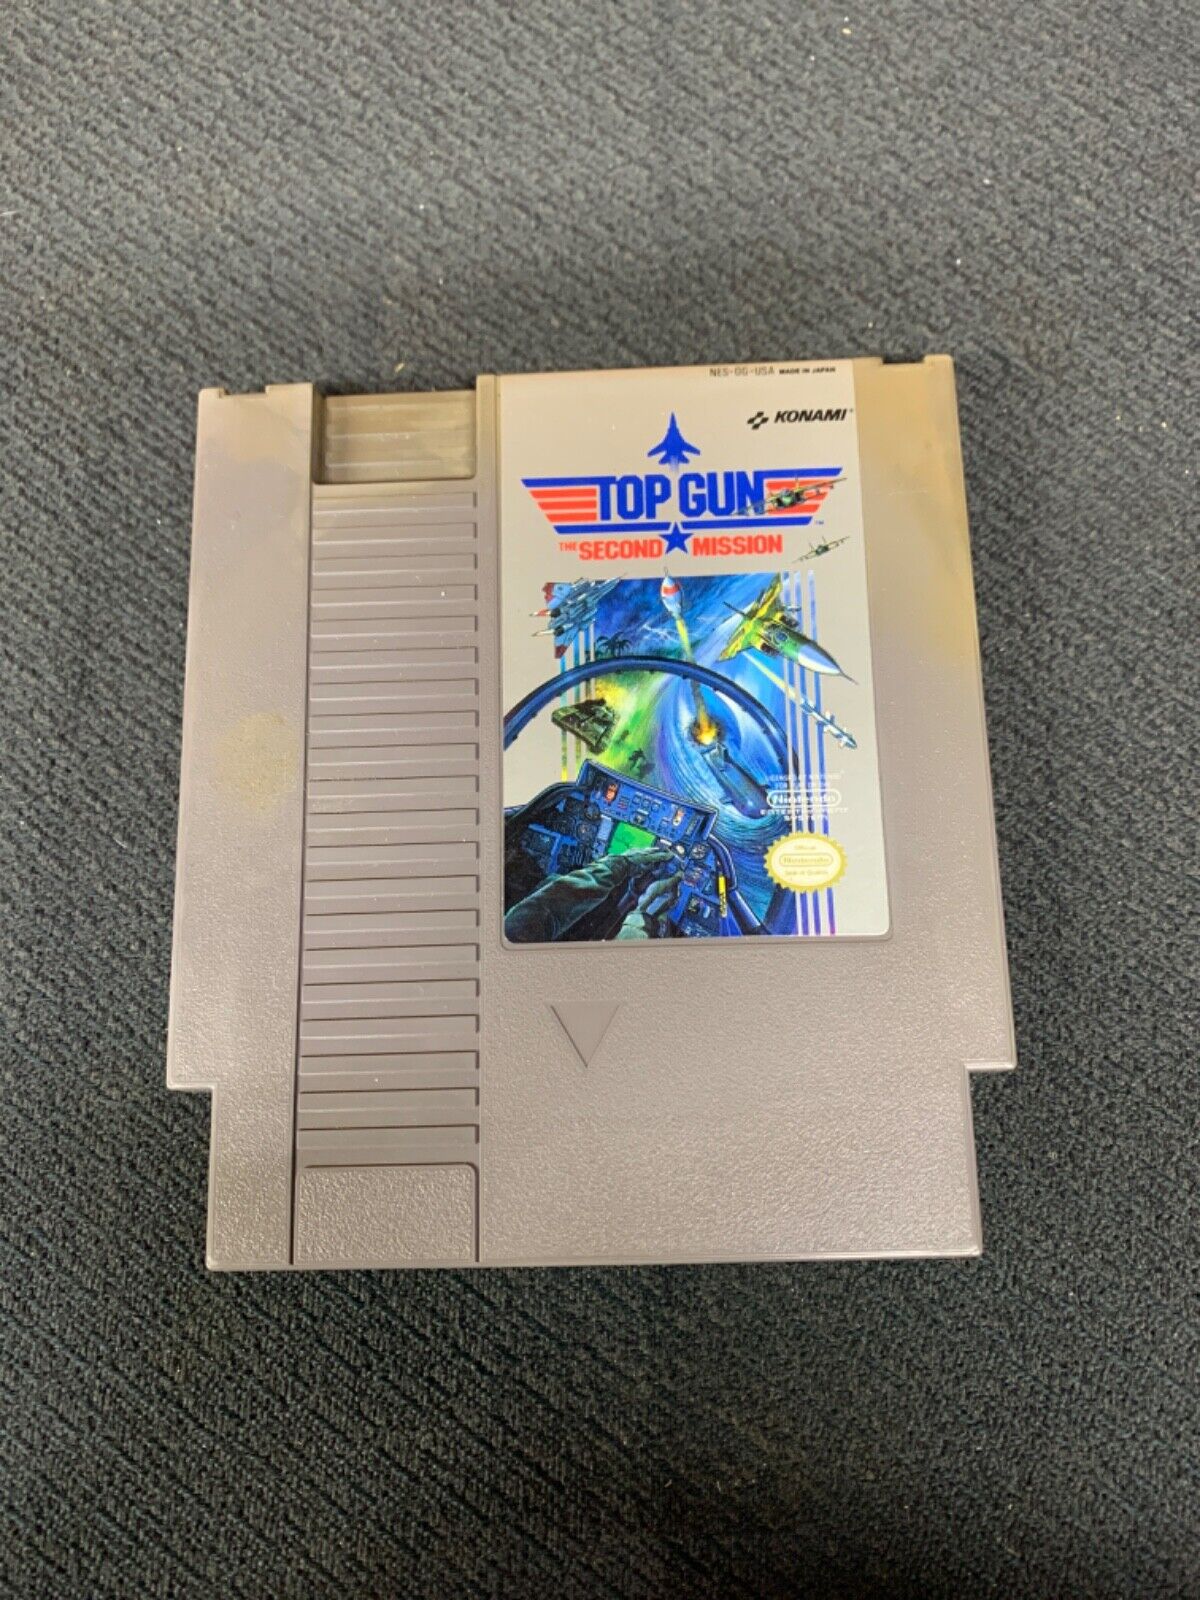 Top Gun: The Second Mission (Nintendo NES, 1990) Game Only